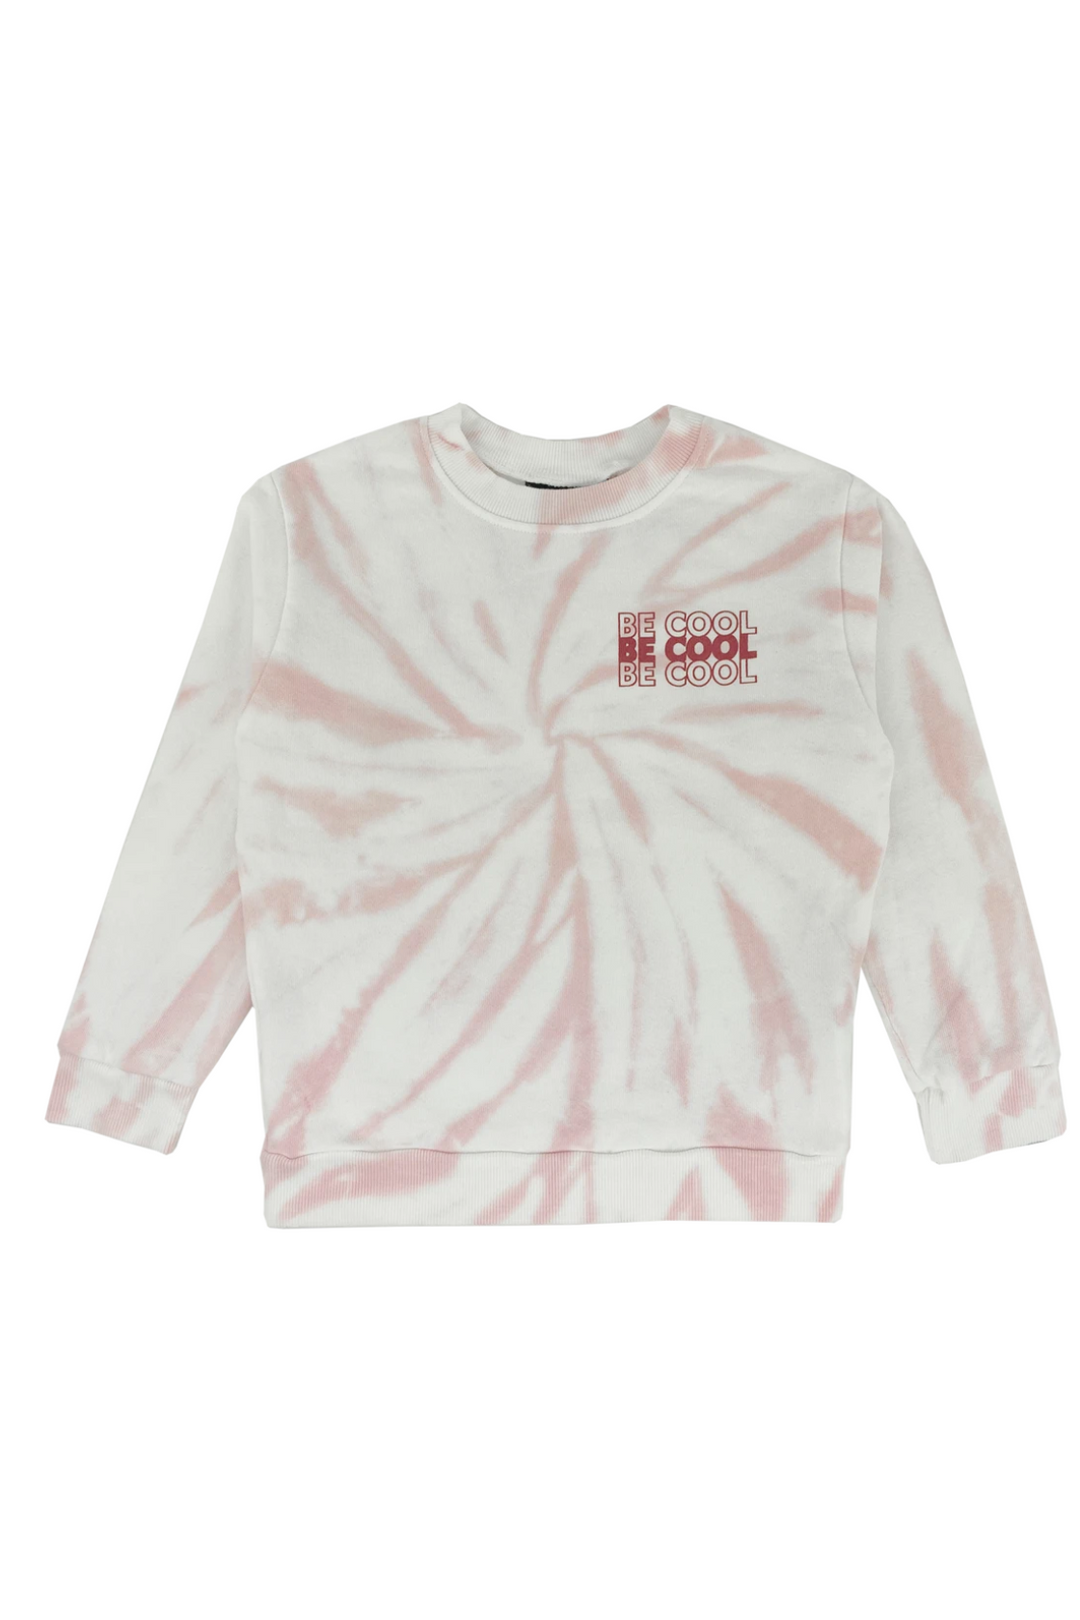 The Be Cool Boxy Sweatshirt by Tiny Whales